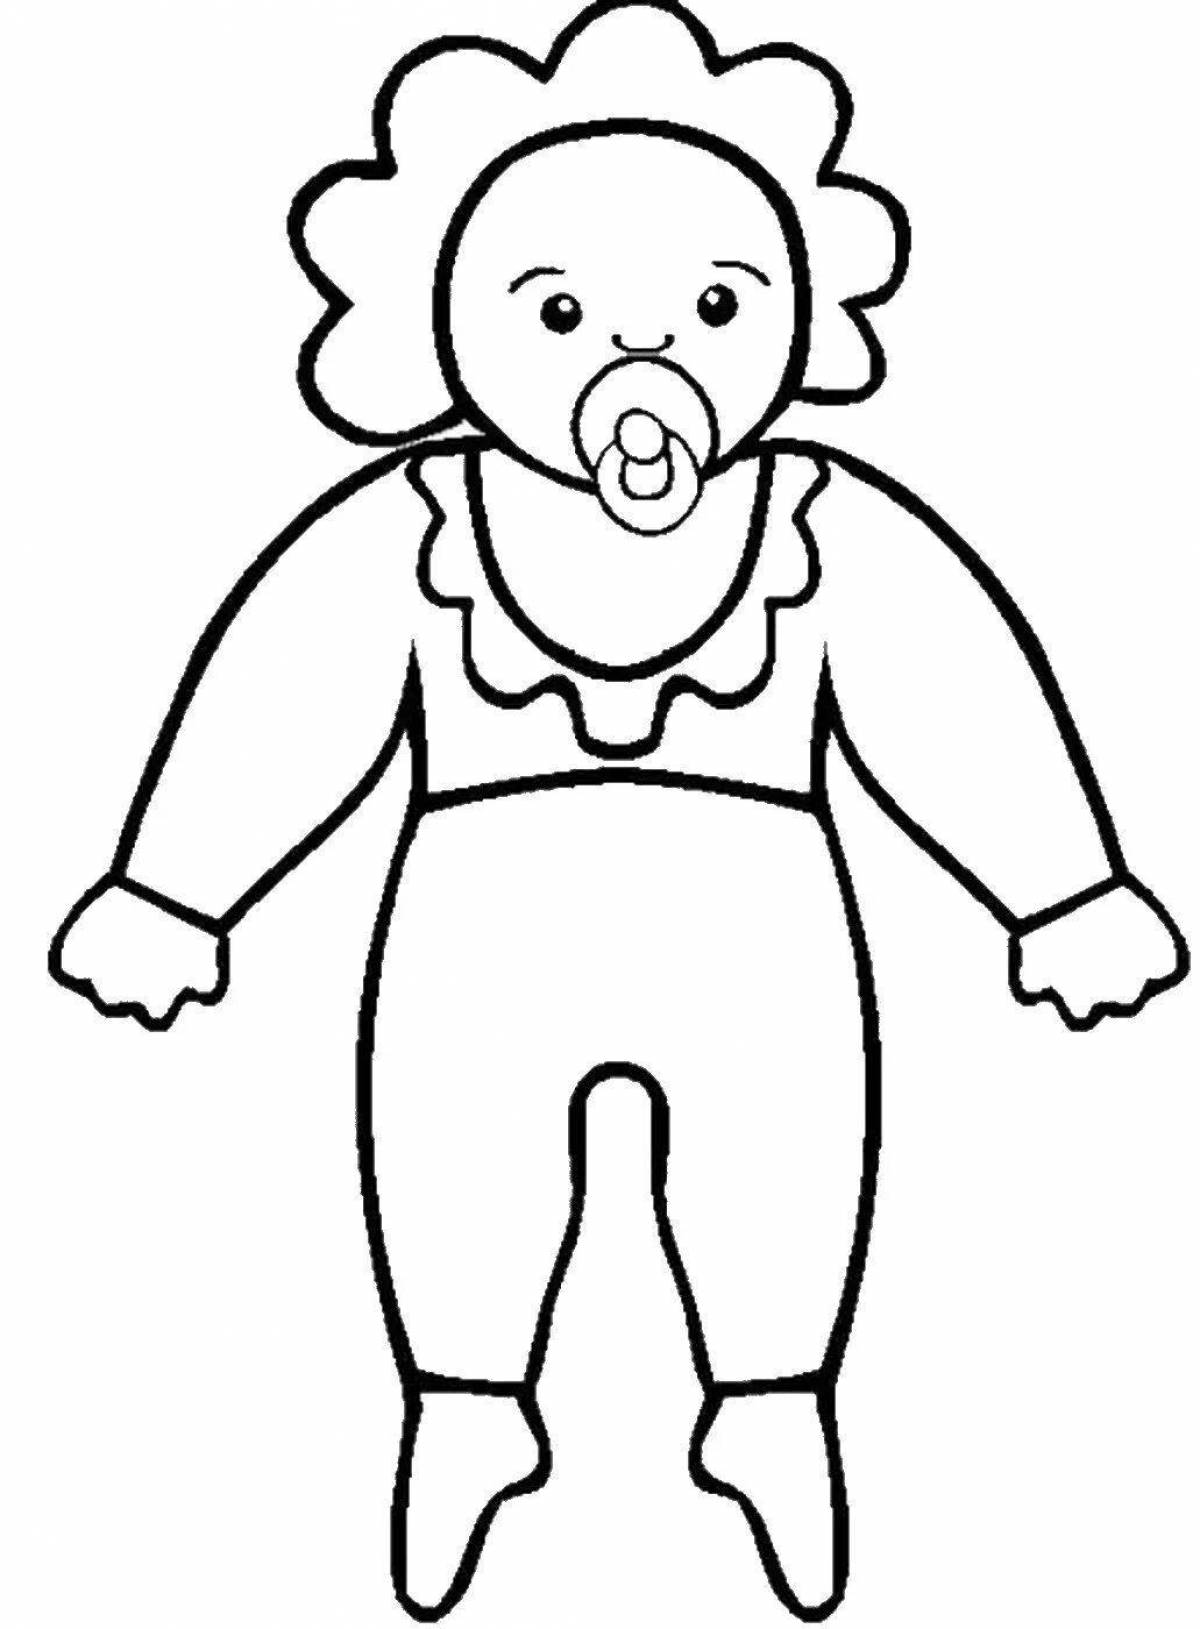 Coloring page charming dolly